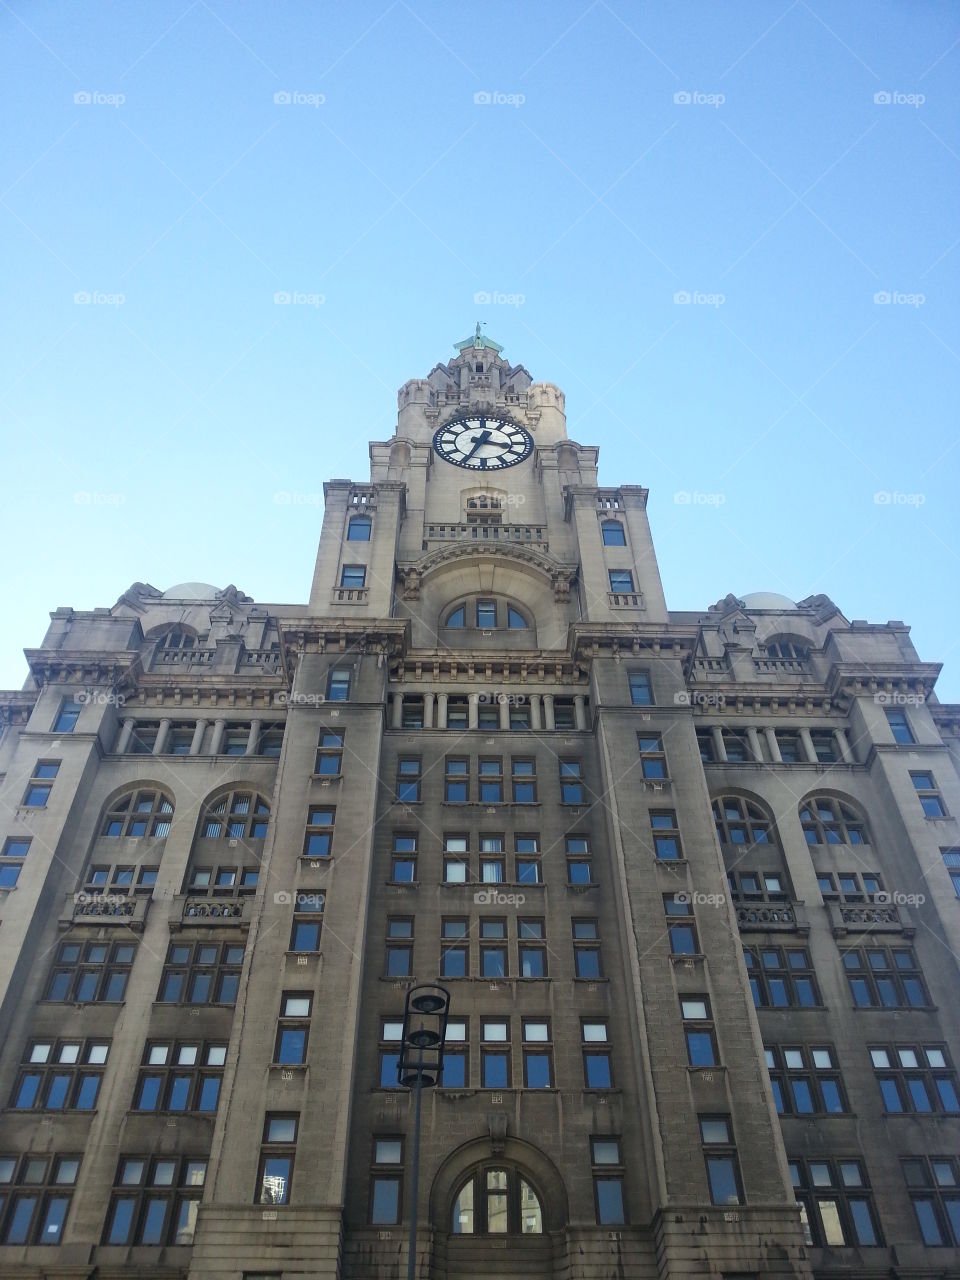 The liver building